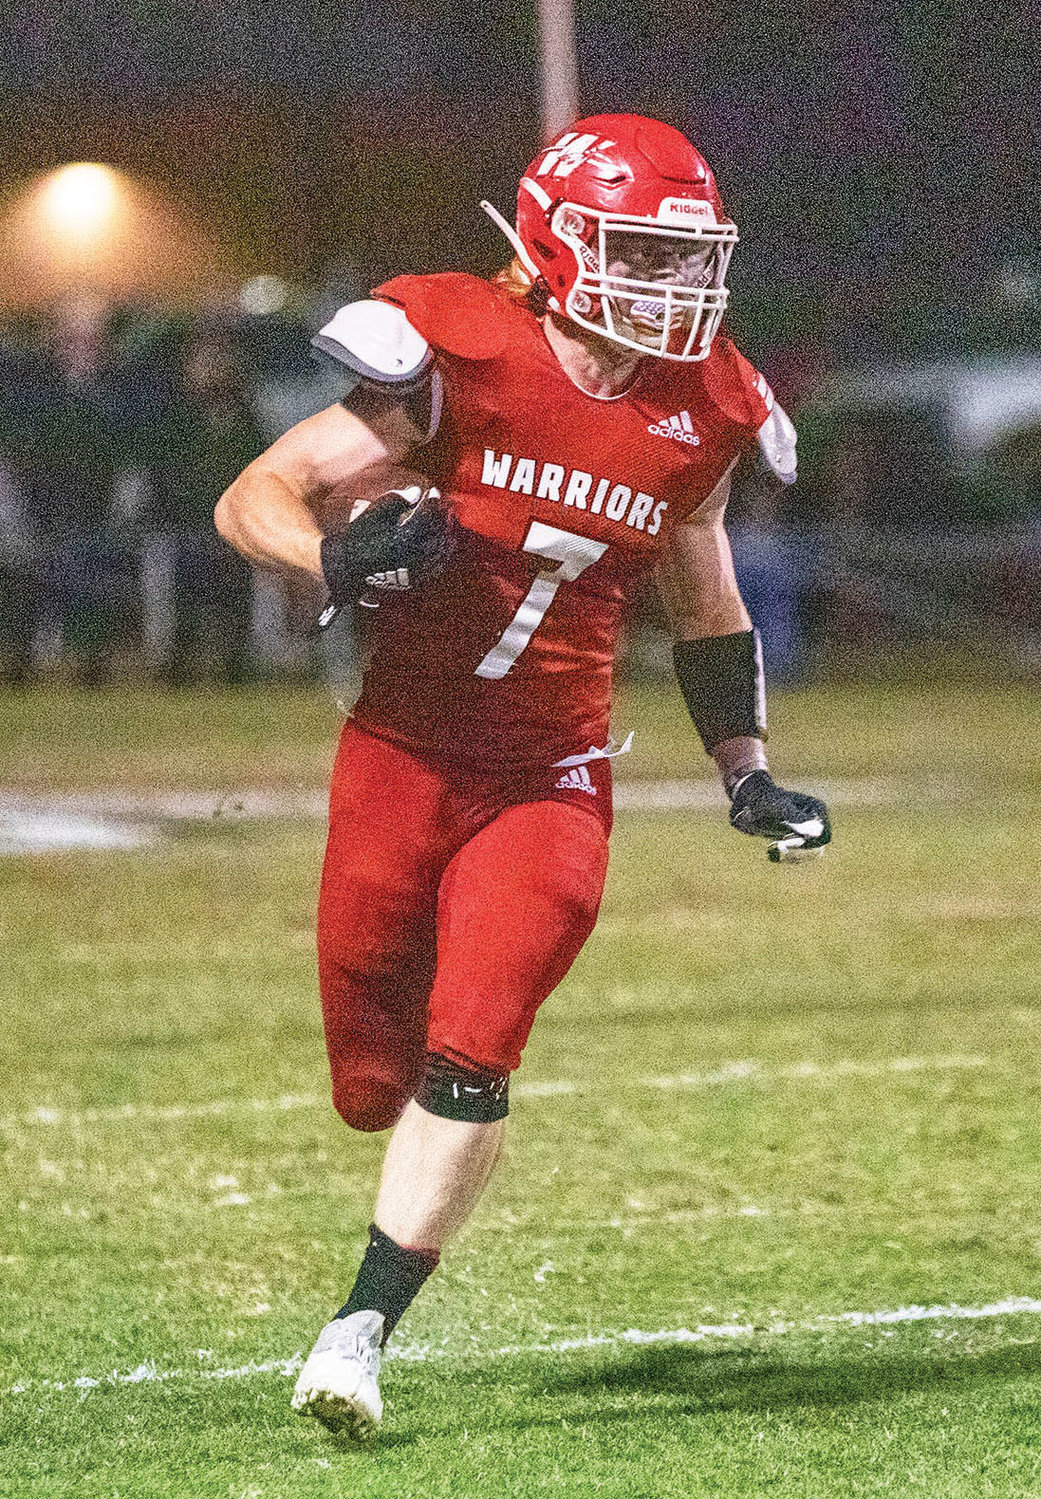 Washington junior Cole Scott rushes the football during the Warriors’ 55-20 win over Comanche in the opening round of the State playoffs. Scott led the rushing charts with 15 carries for 170 yards and a two-yard touchdown burst. The Warriors host Jones Friday night. Kickoff is at 7 p.m.